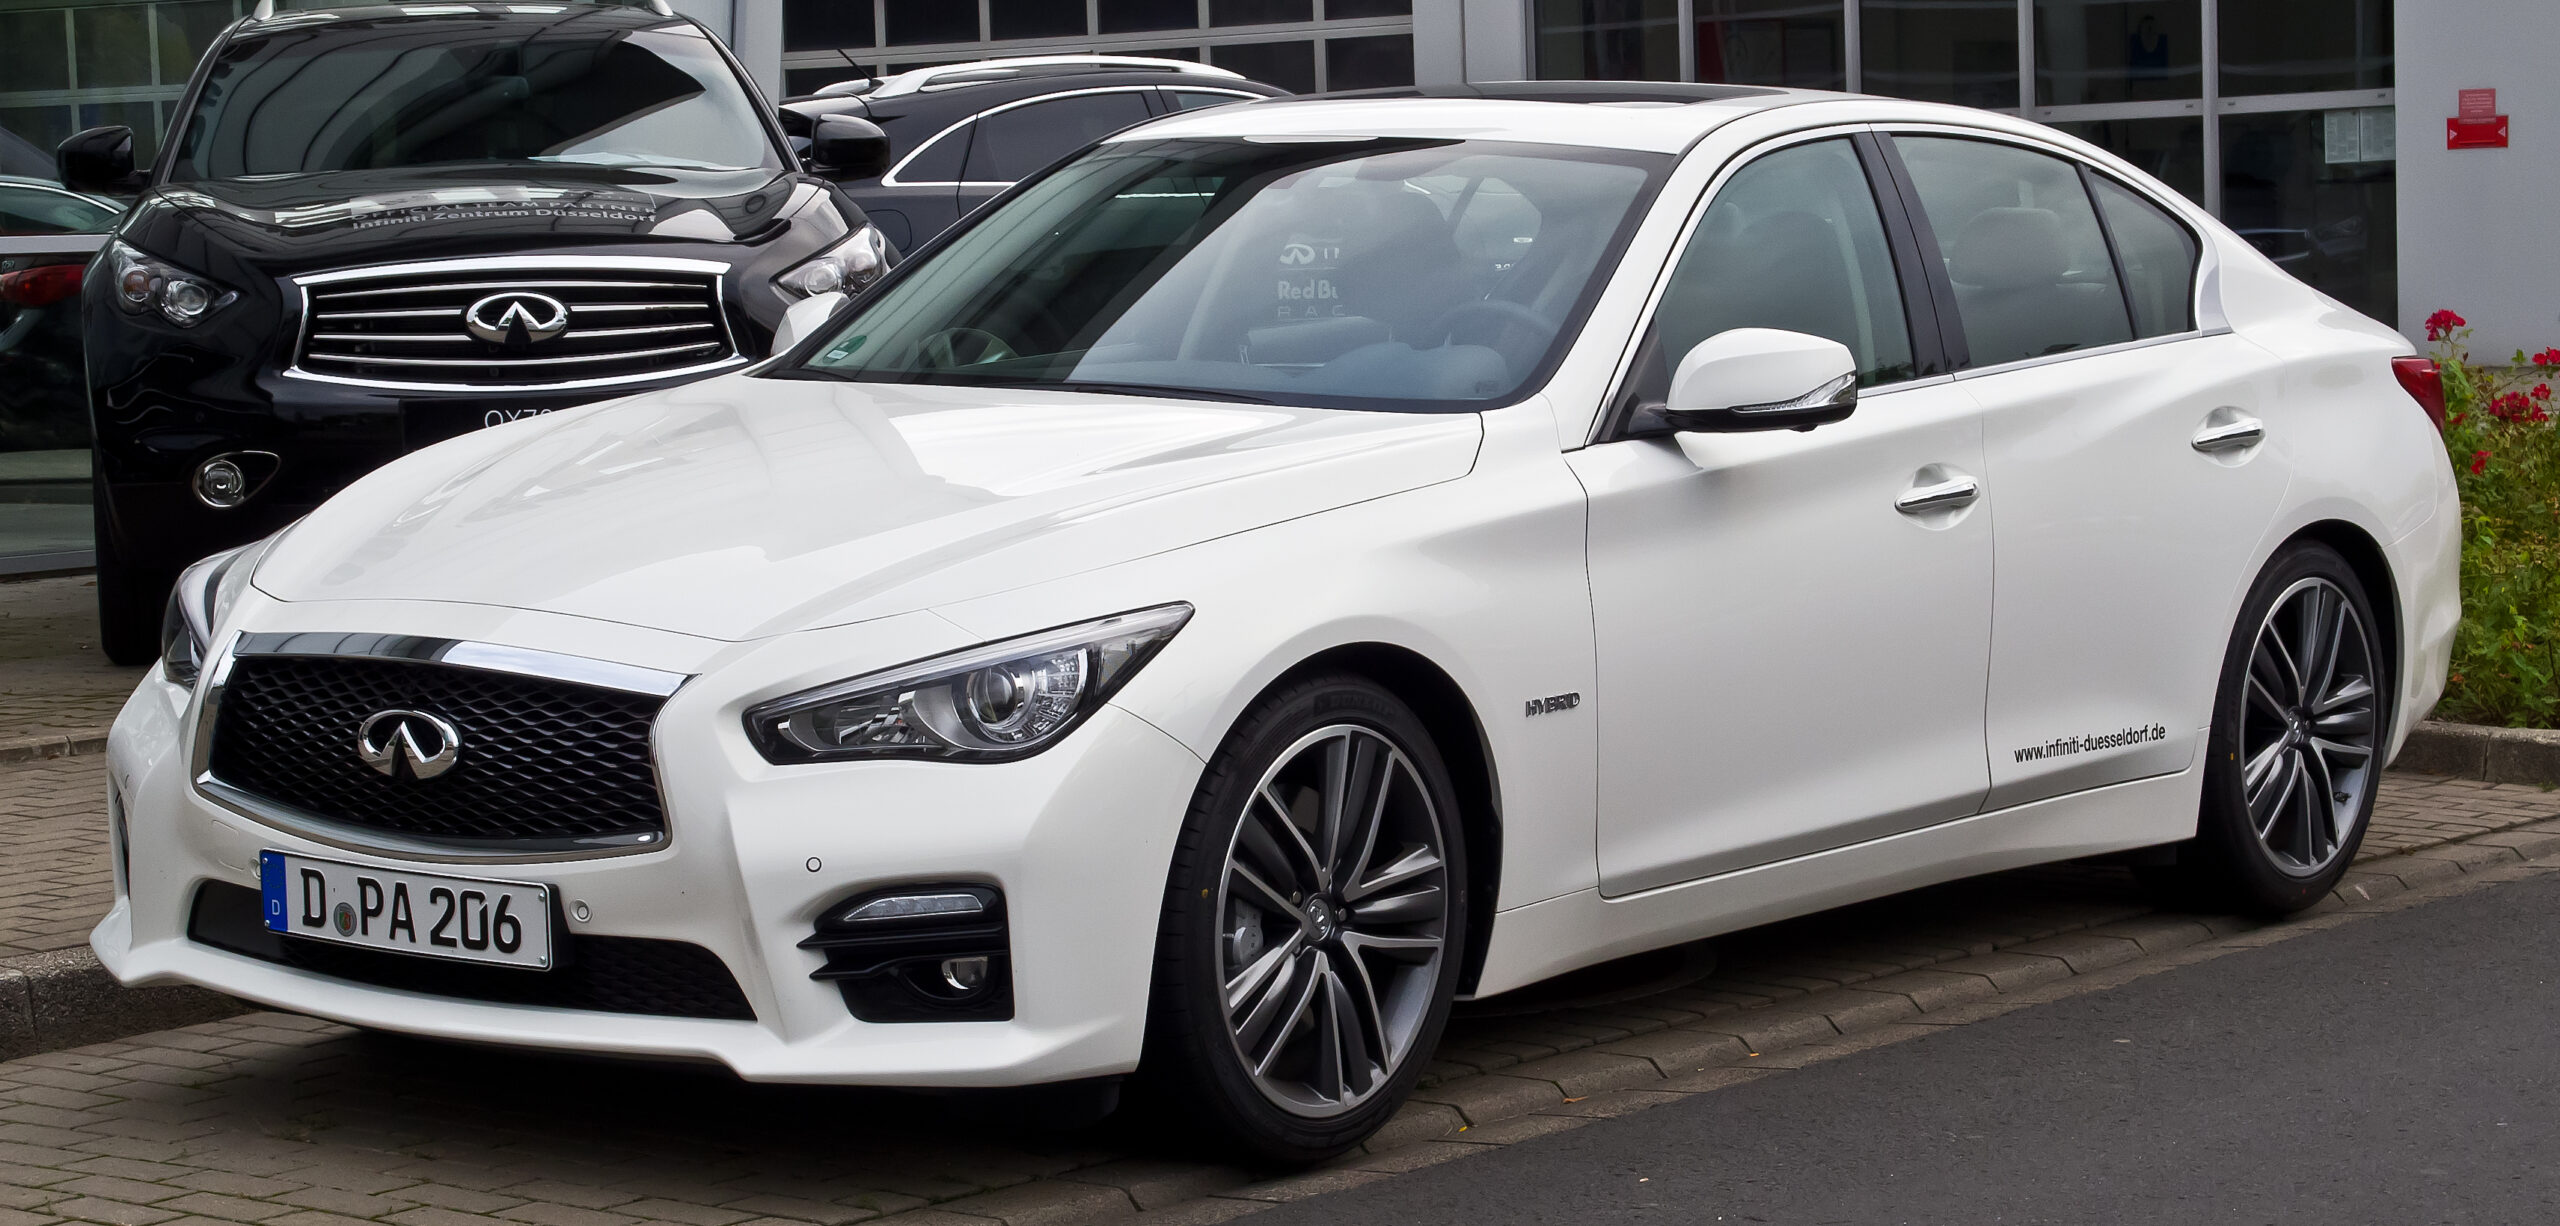 What Is Infiniti Q50 Turbo Replacement Cost? - Full Coverage!